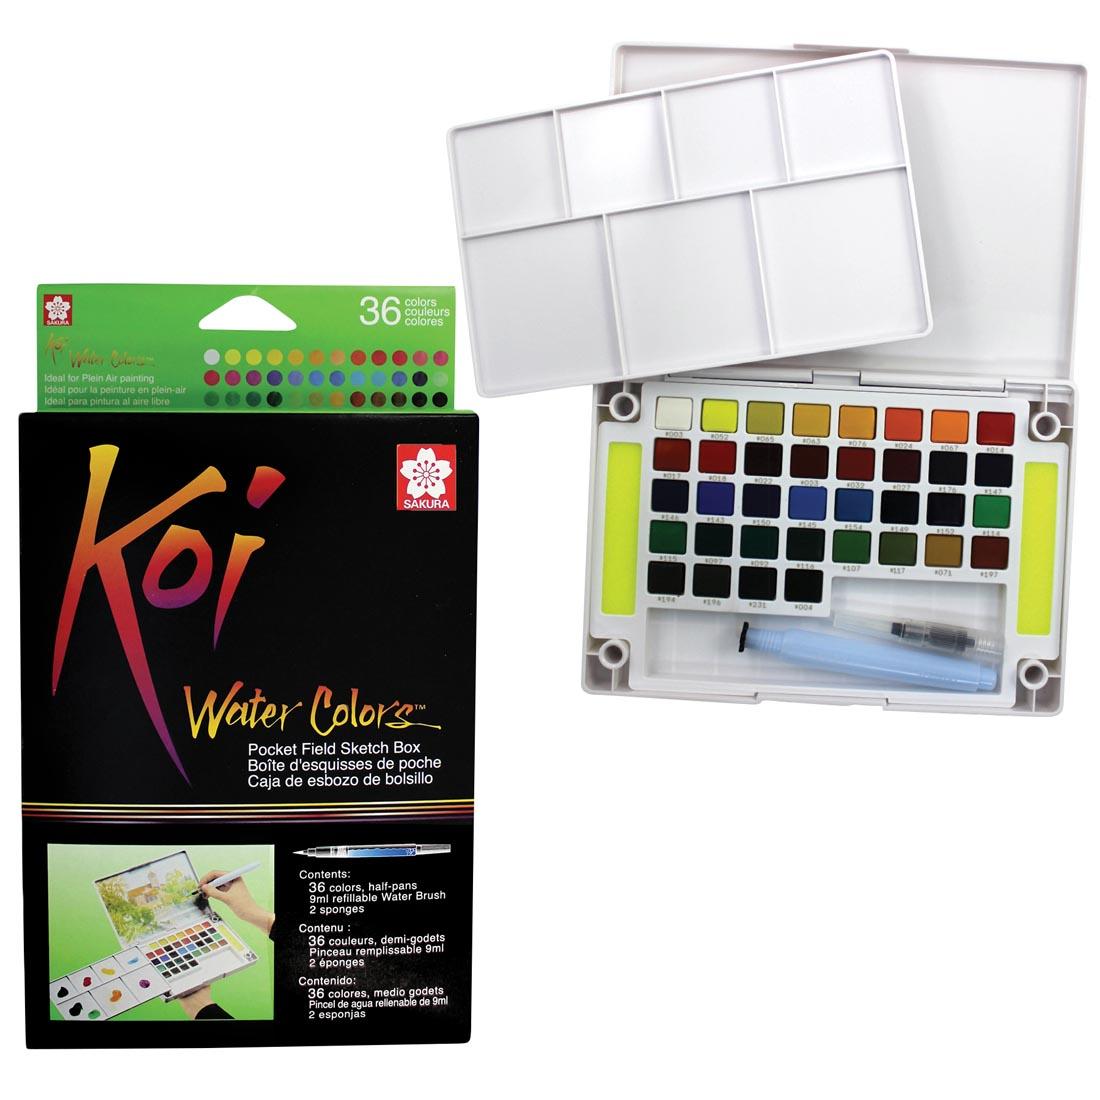 Sakura Koi Water Colors Pocket Field Sketch Box 36-Color shown both in package and open